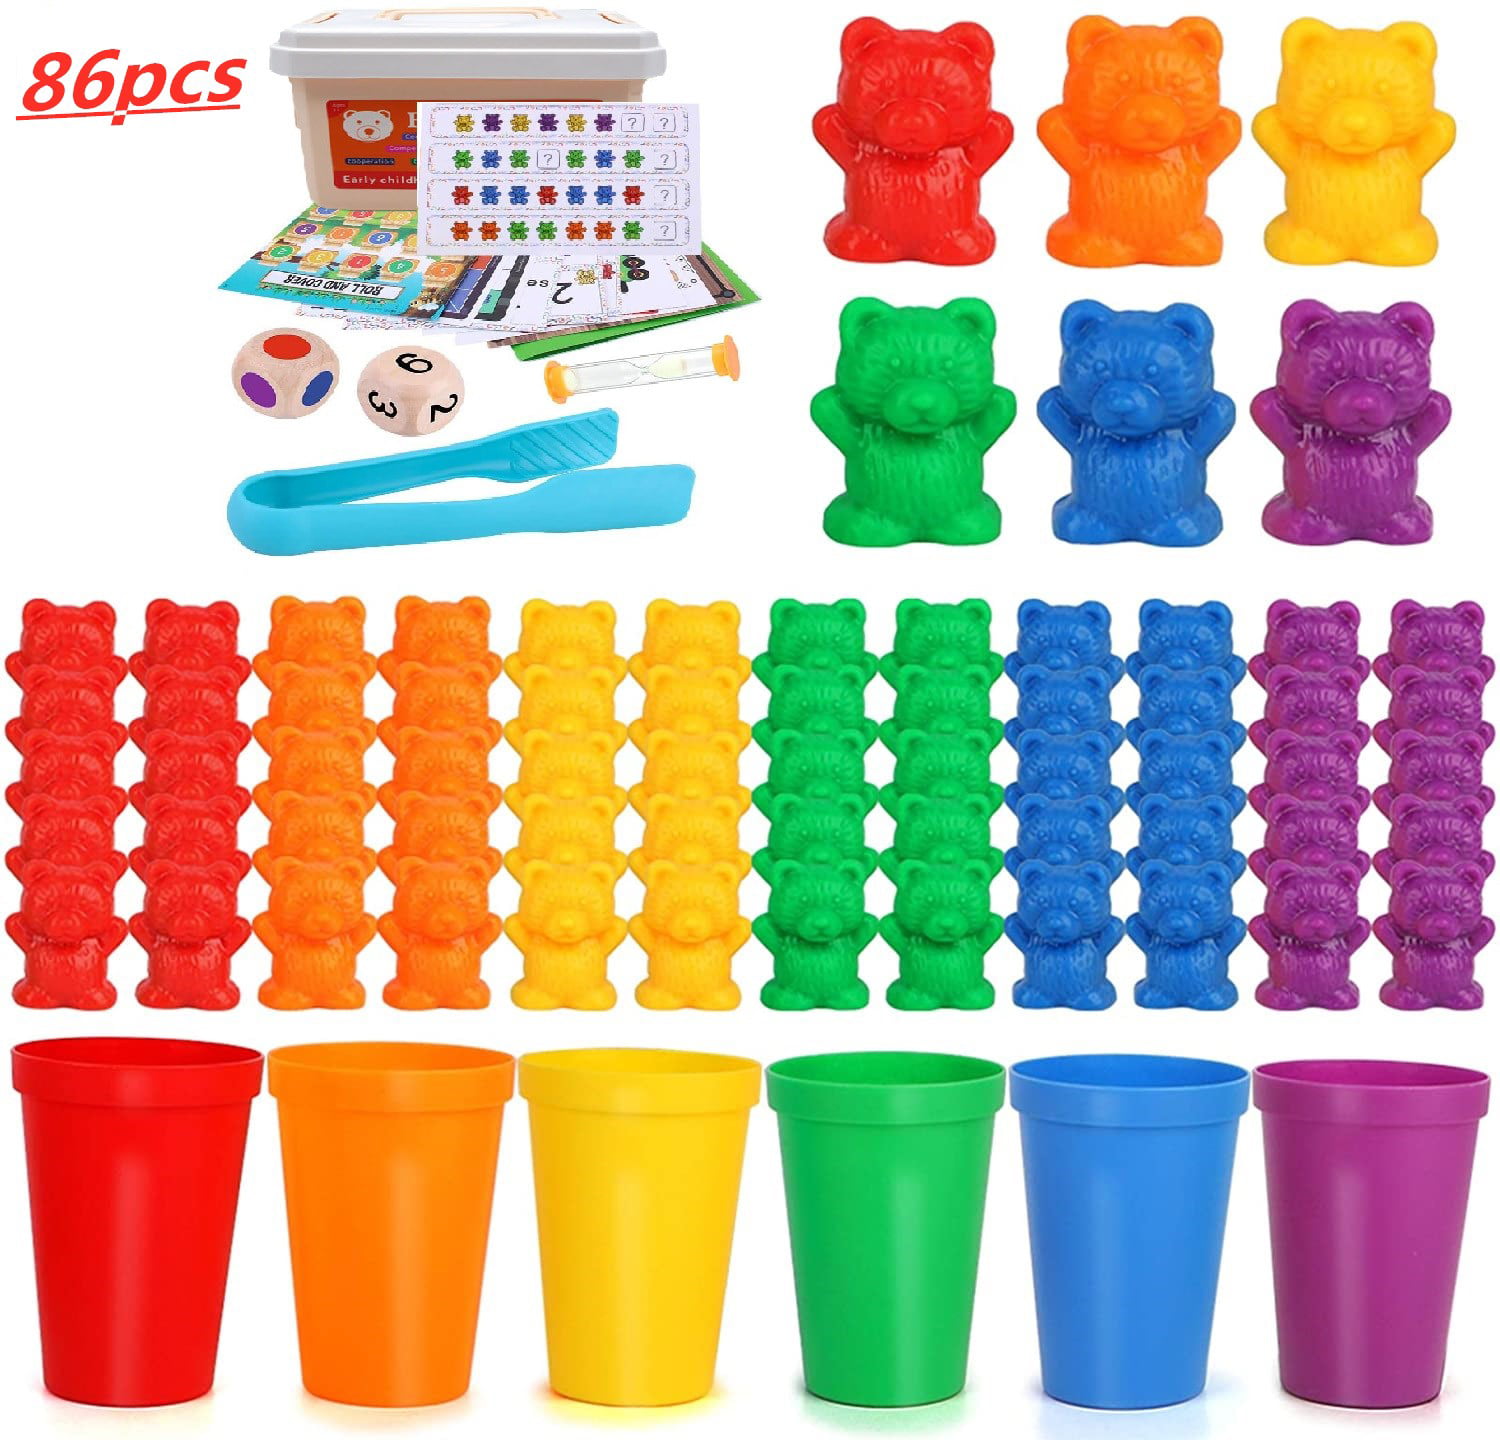 Game Maps Math Manipulatives Sorting Bears for Kids Joyjoz Counting Bears Hourglass Toddler Learning Toy Number Color Recognition Educational Toy Dice Sorting Cups STEM Toy with Rainbow Bears